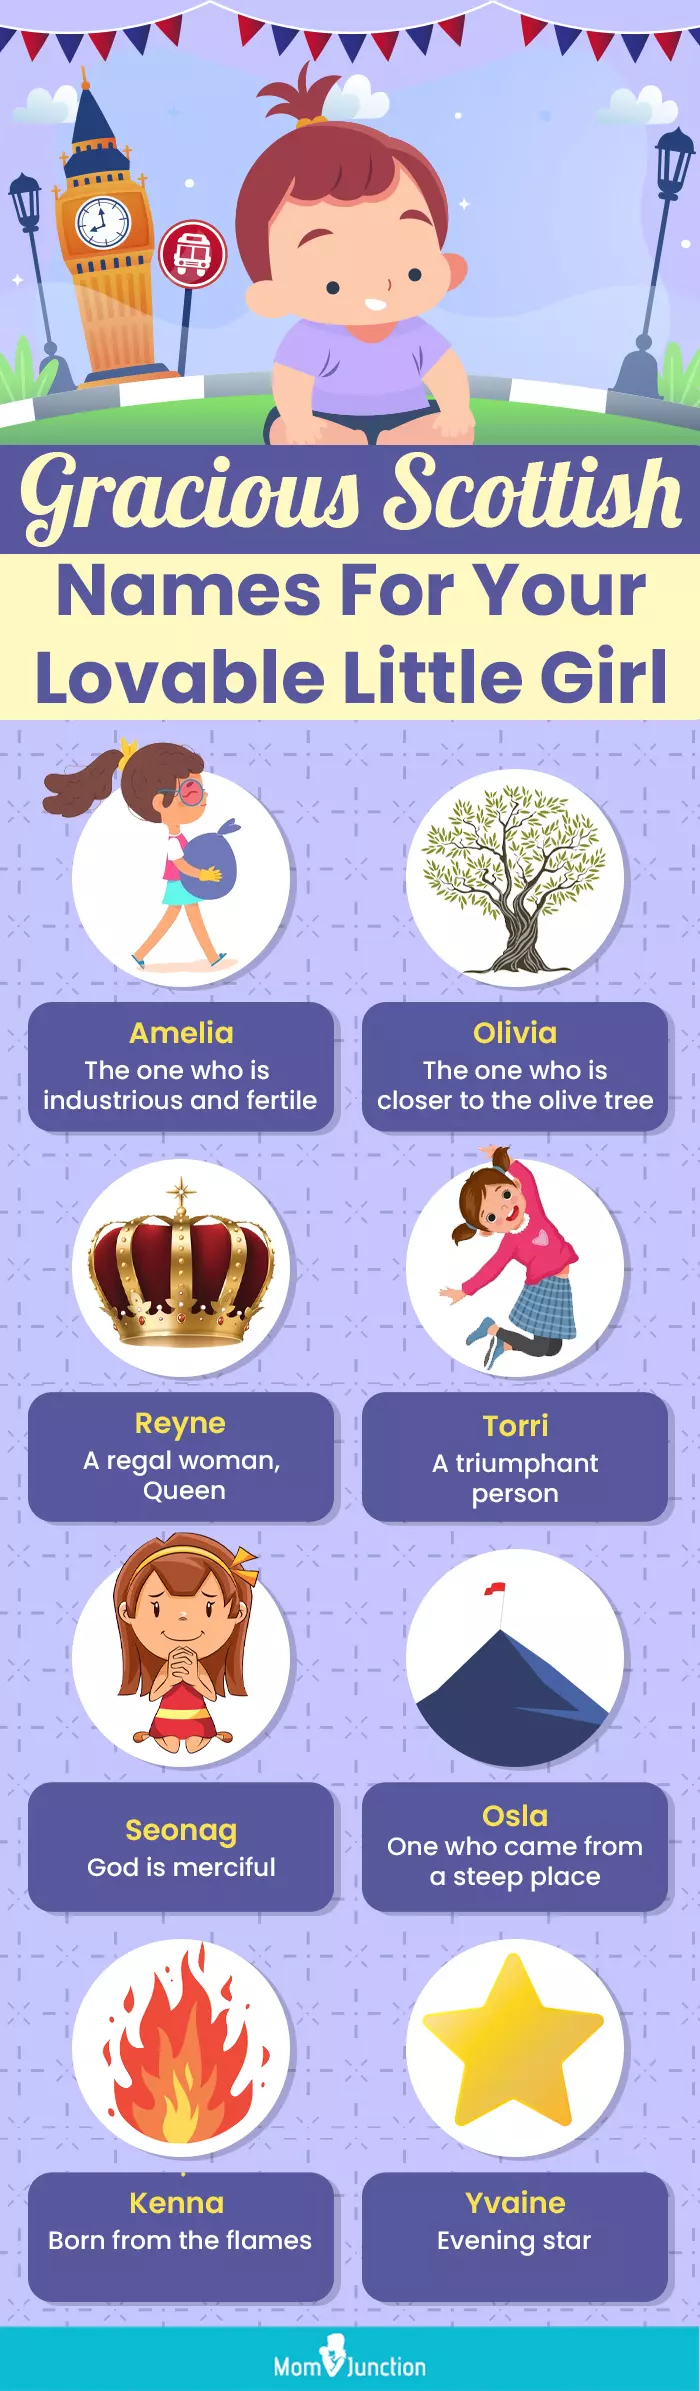 gracious scottish names for your lovable little girl (infographic)